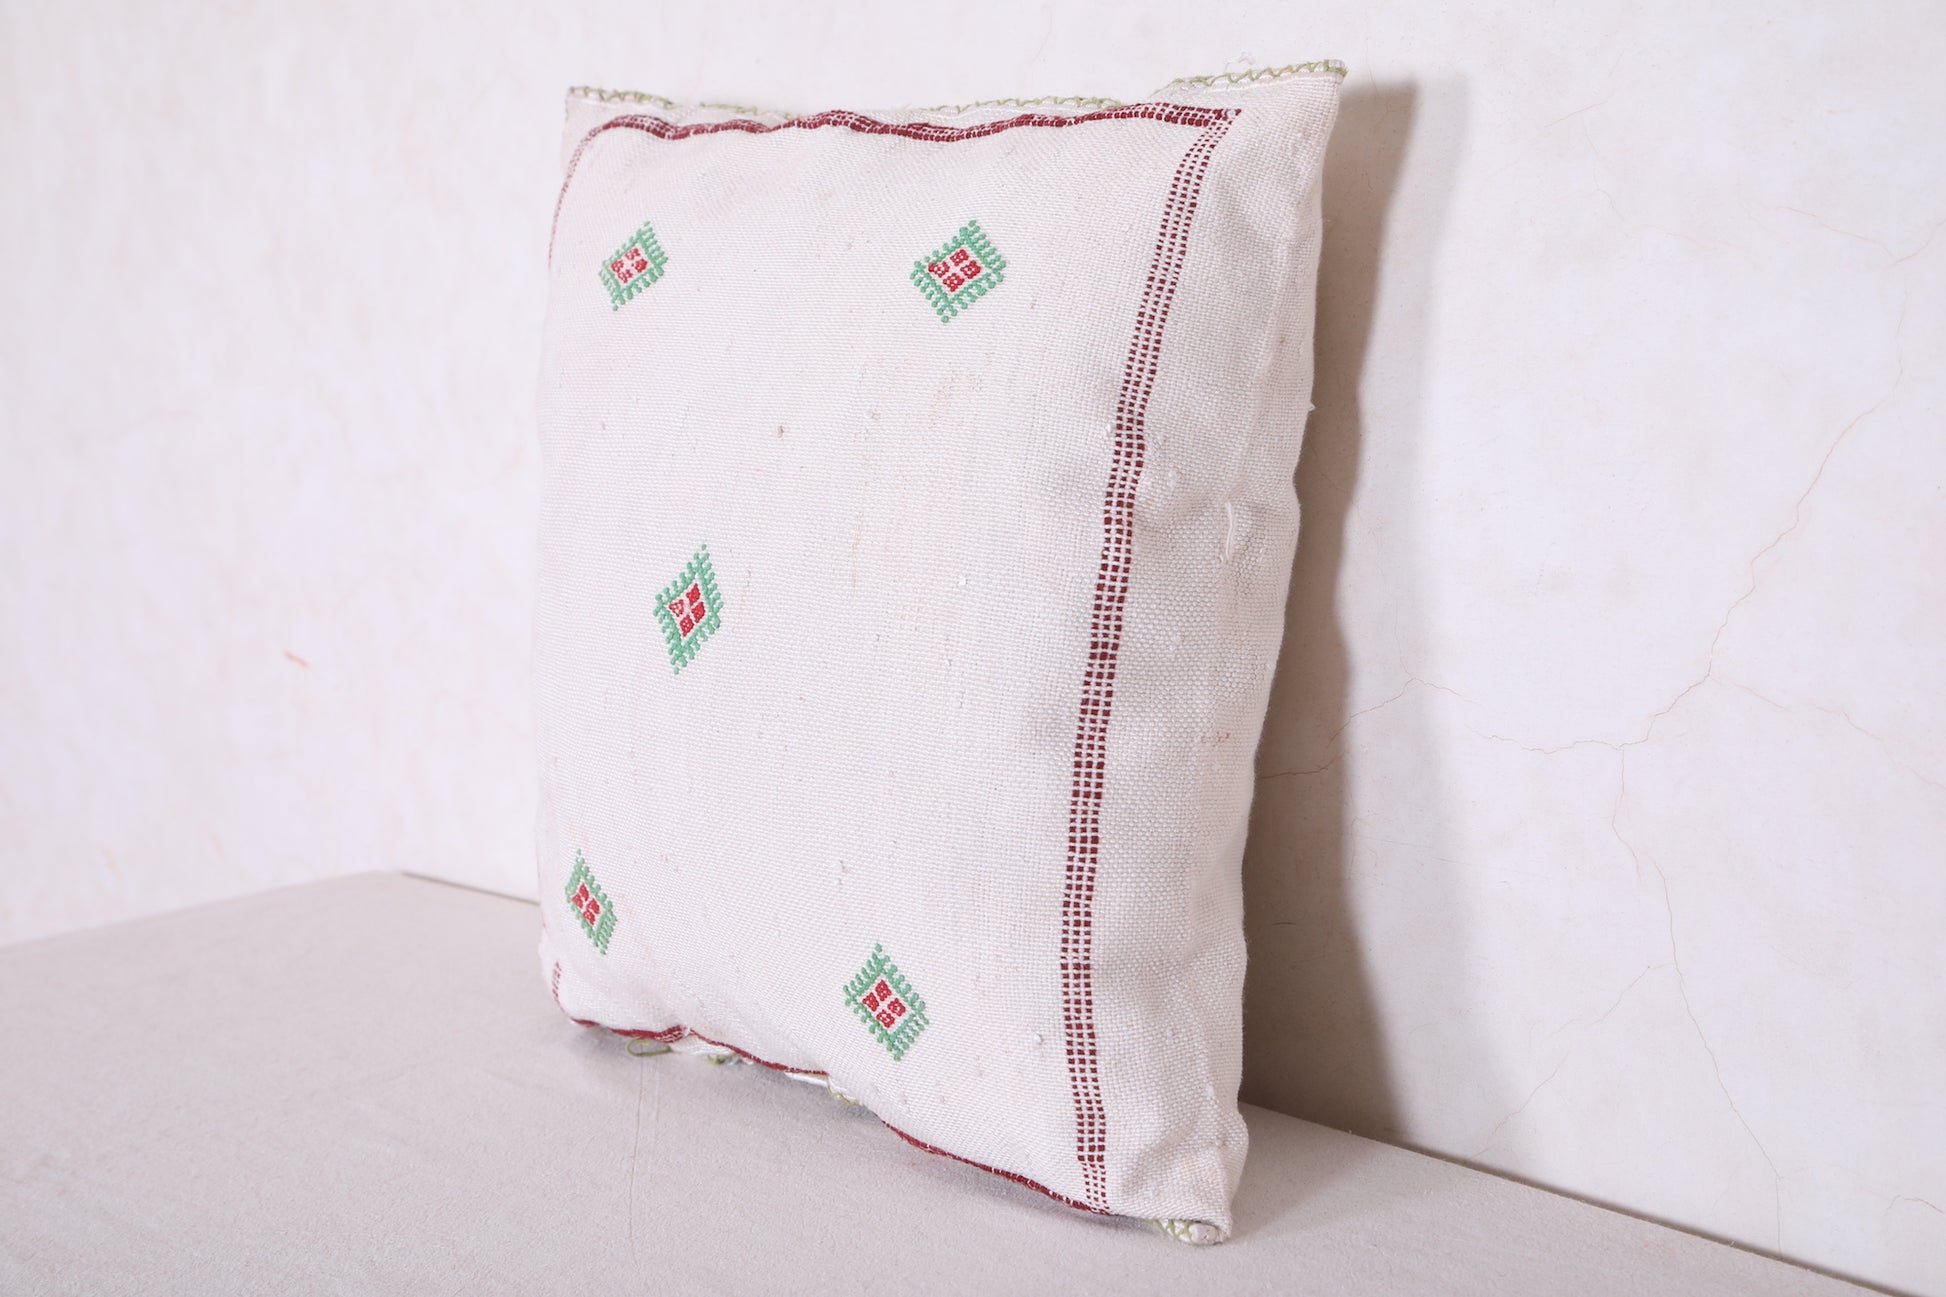 Moroccan pillow sqaure 18.1 INCHES X 18.1 INCHES